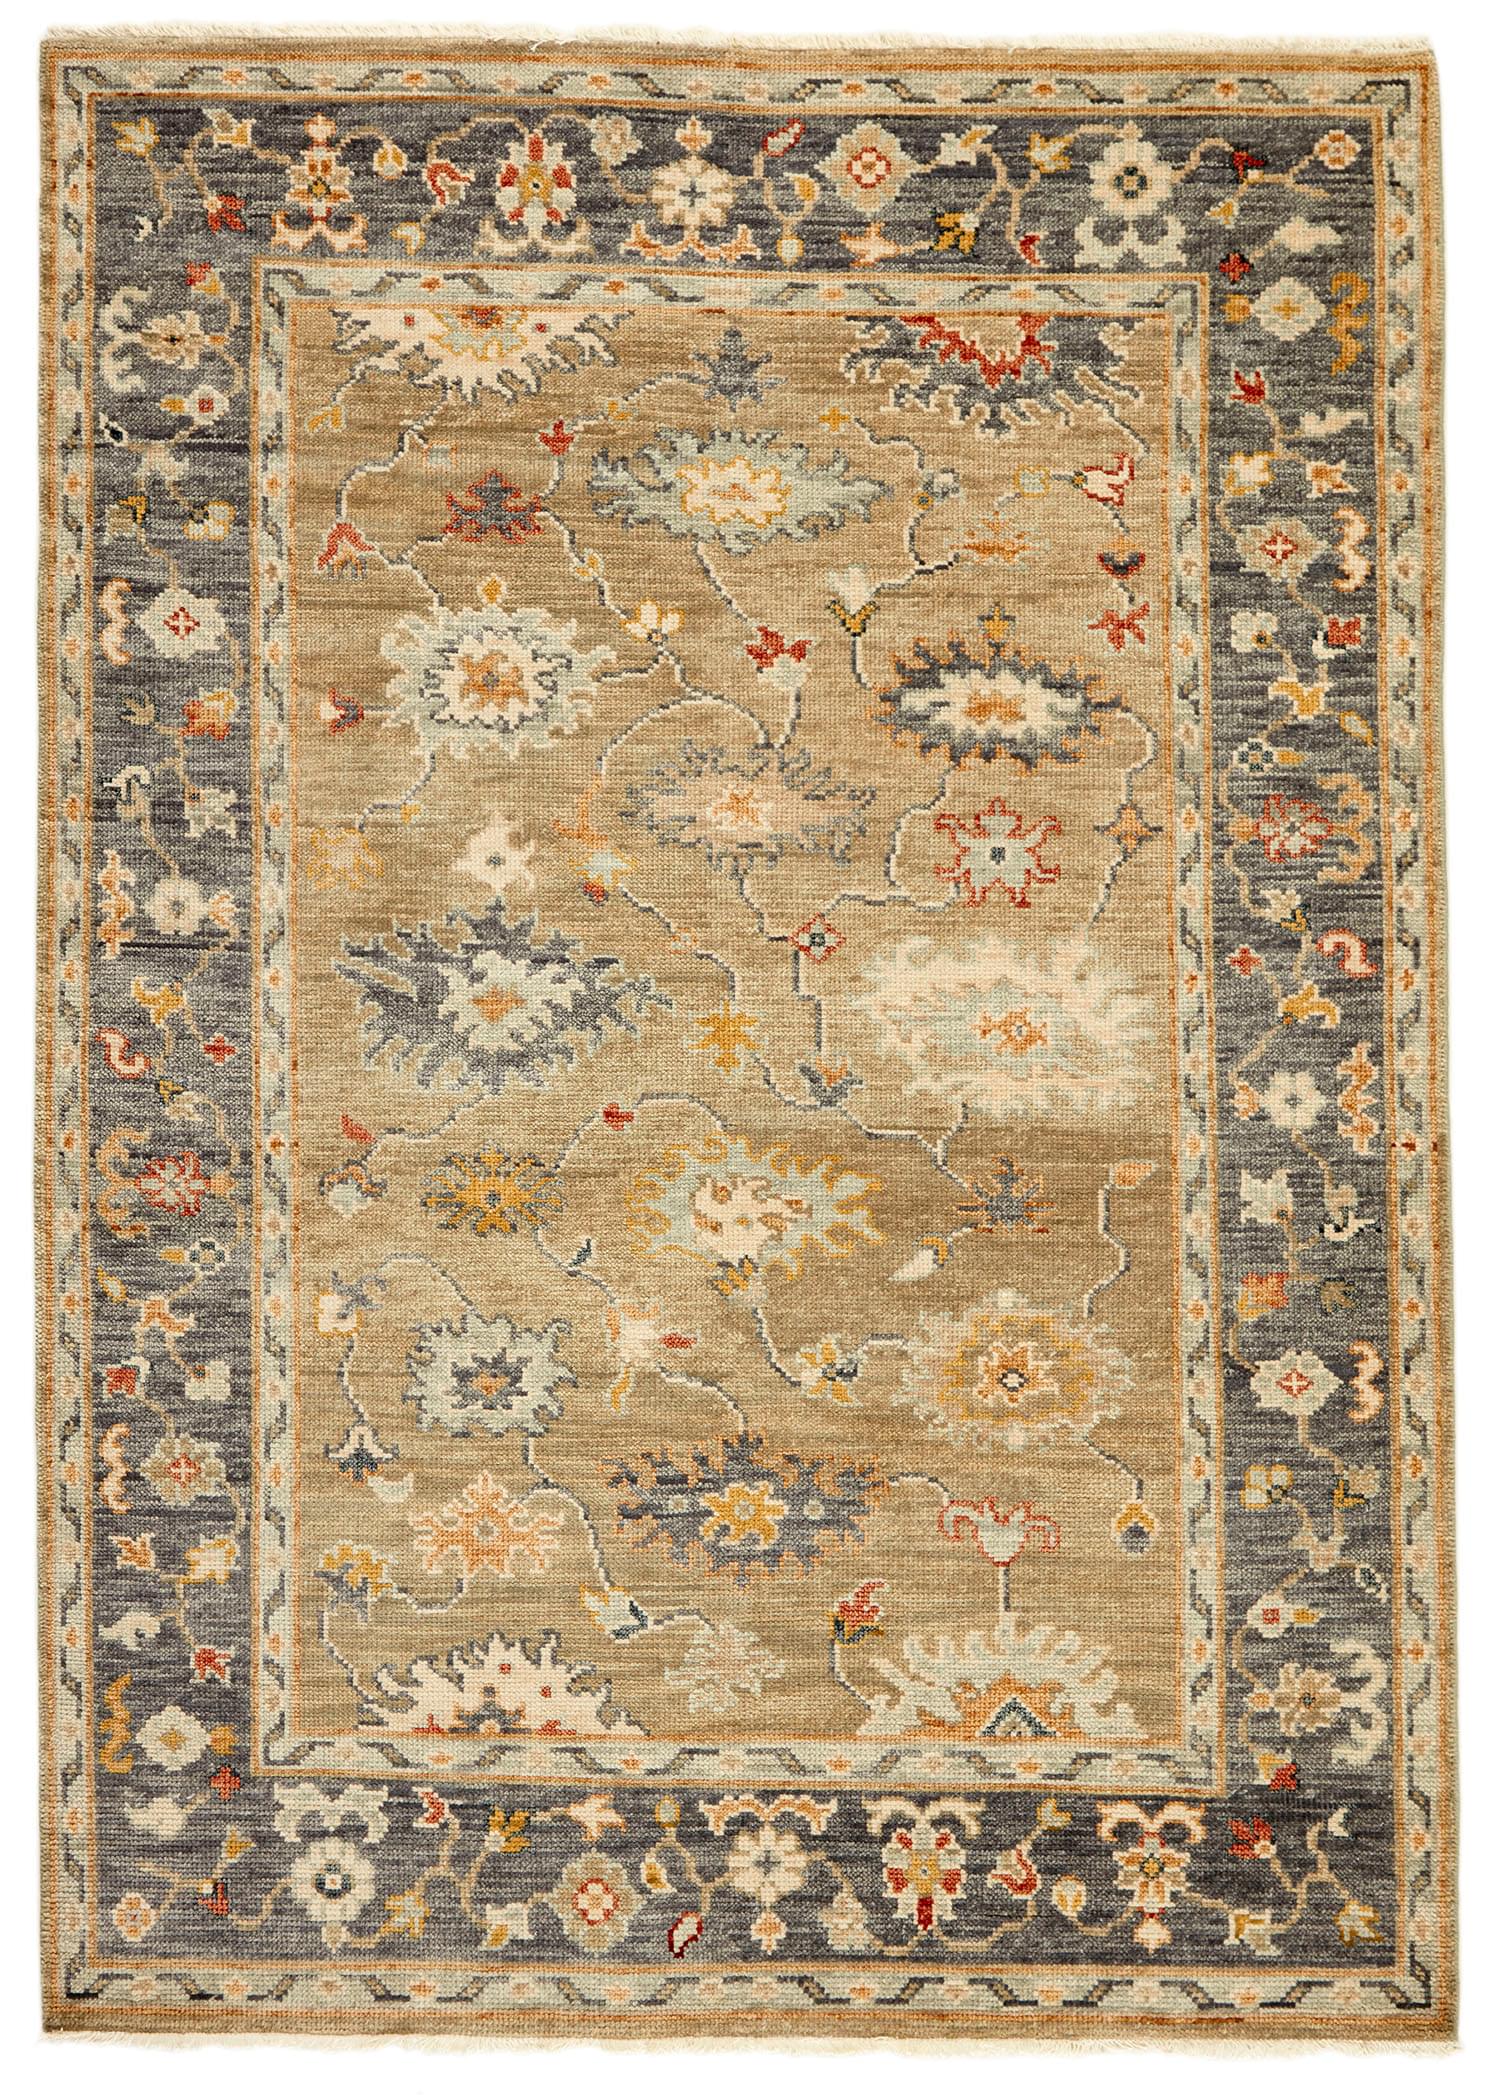 authentic Oriental rug with traditional motifs in red, orange, grey, beige and brown